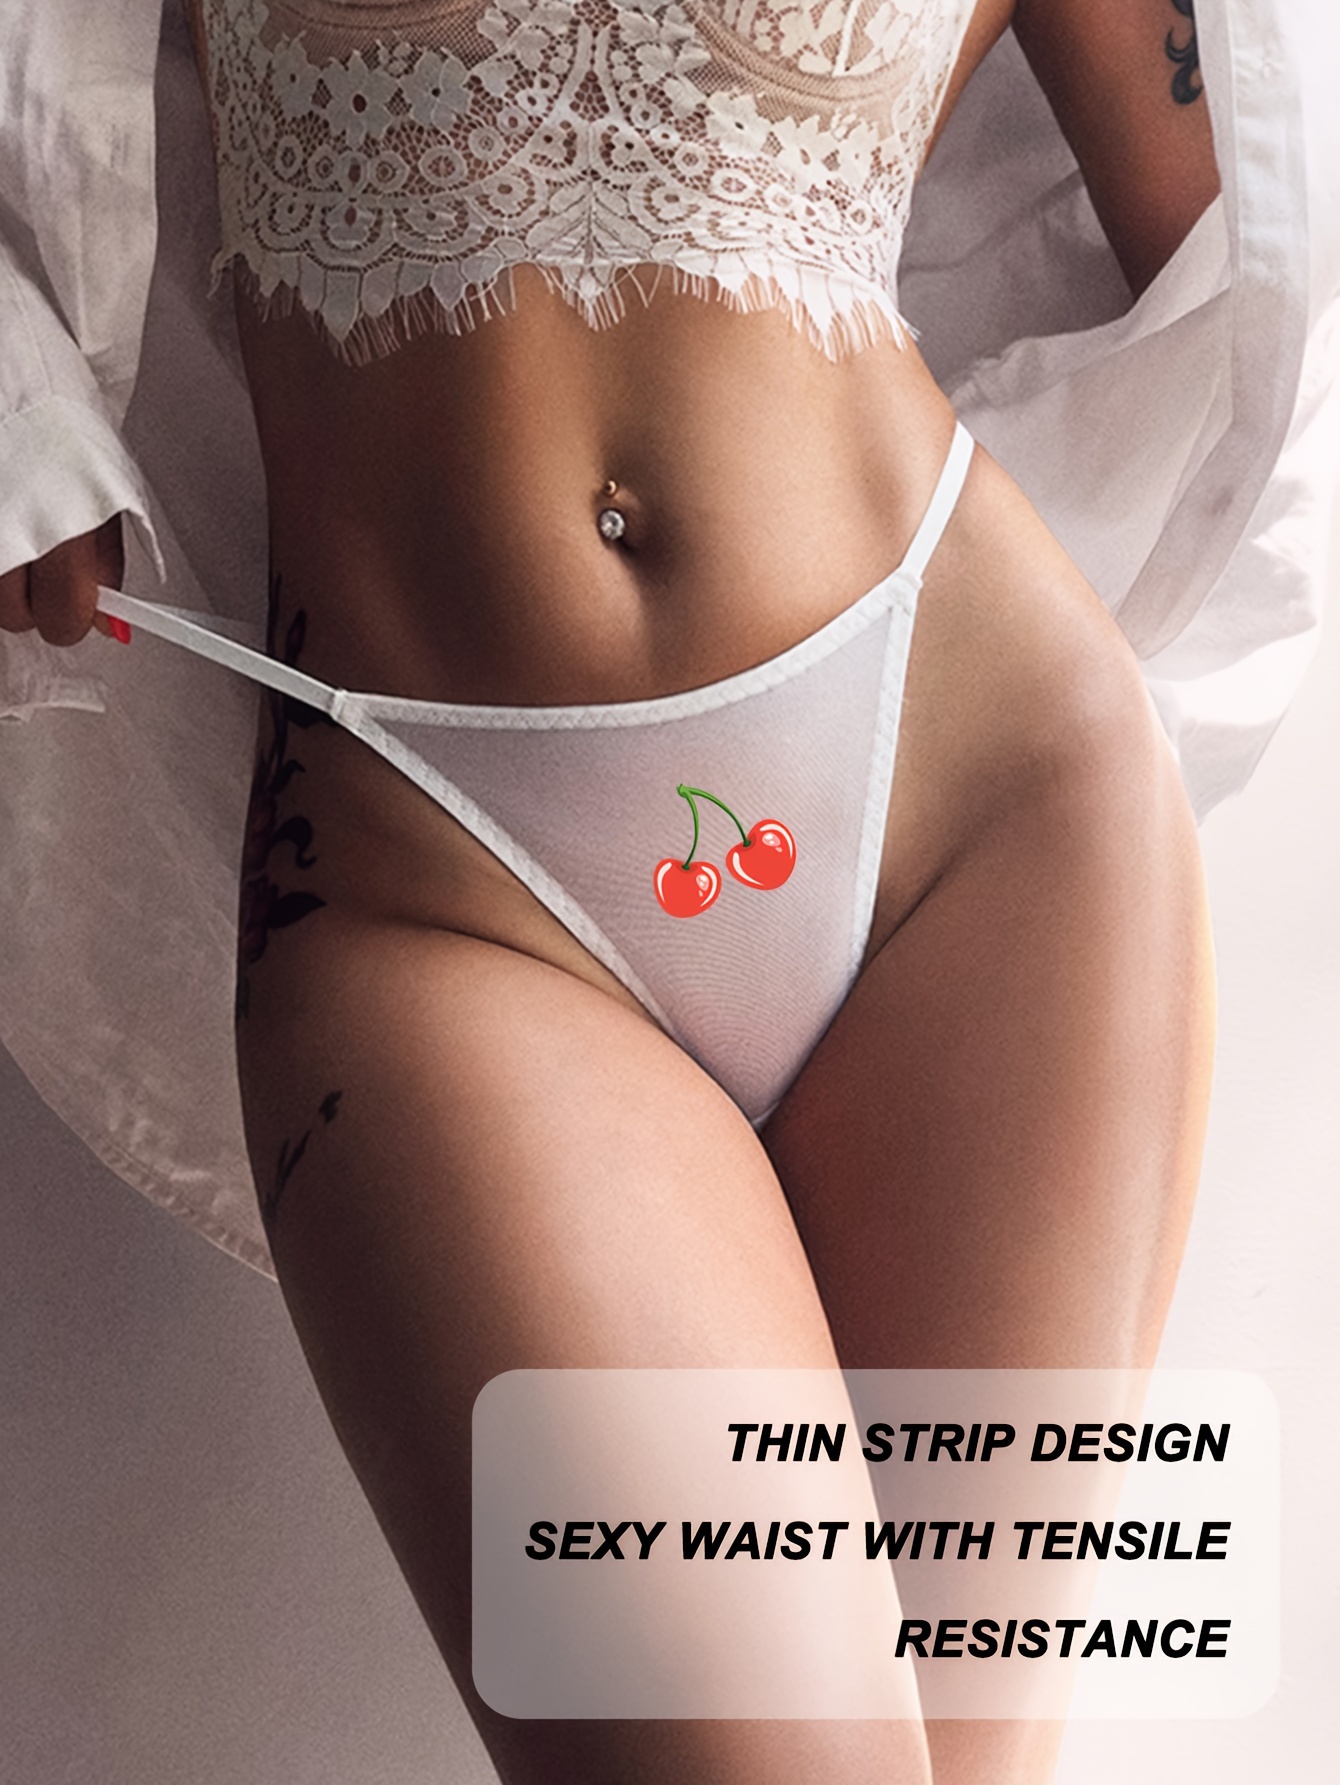 Strawberry Printed Thong Panties Stripper Thong Sexy Underwear Sexy Lingerie  Strawberry Lingerie Women's Underwear Thong Panties G-string 